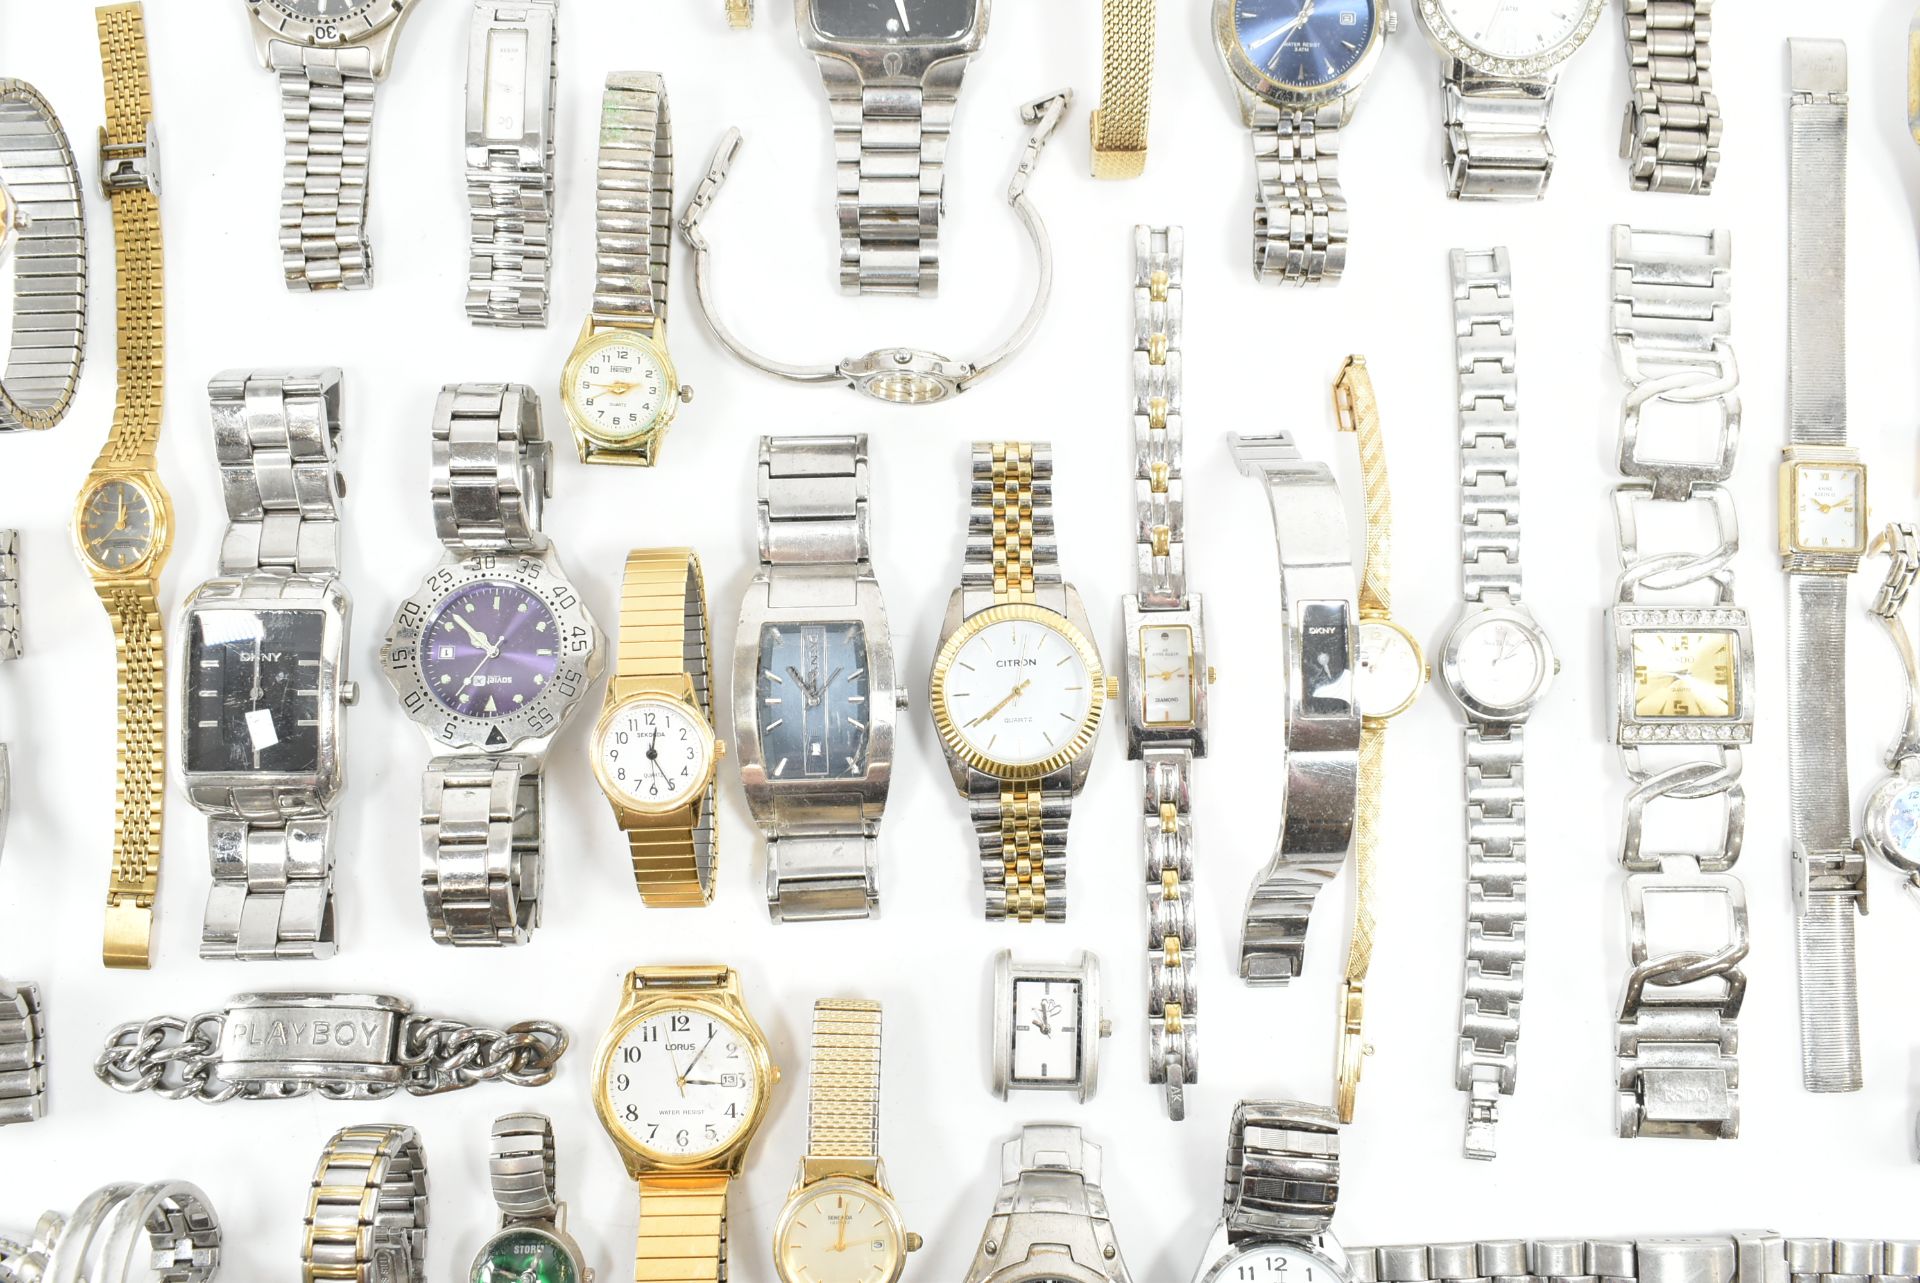 COLLECTION OF ASSORTED GOLD & SILVER TONE WRISTWATCHES - Image 2 of 17